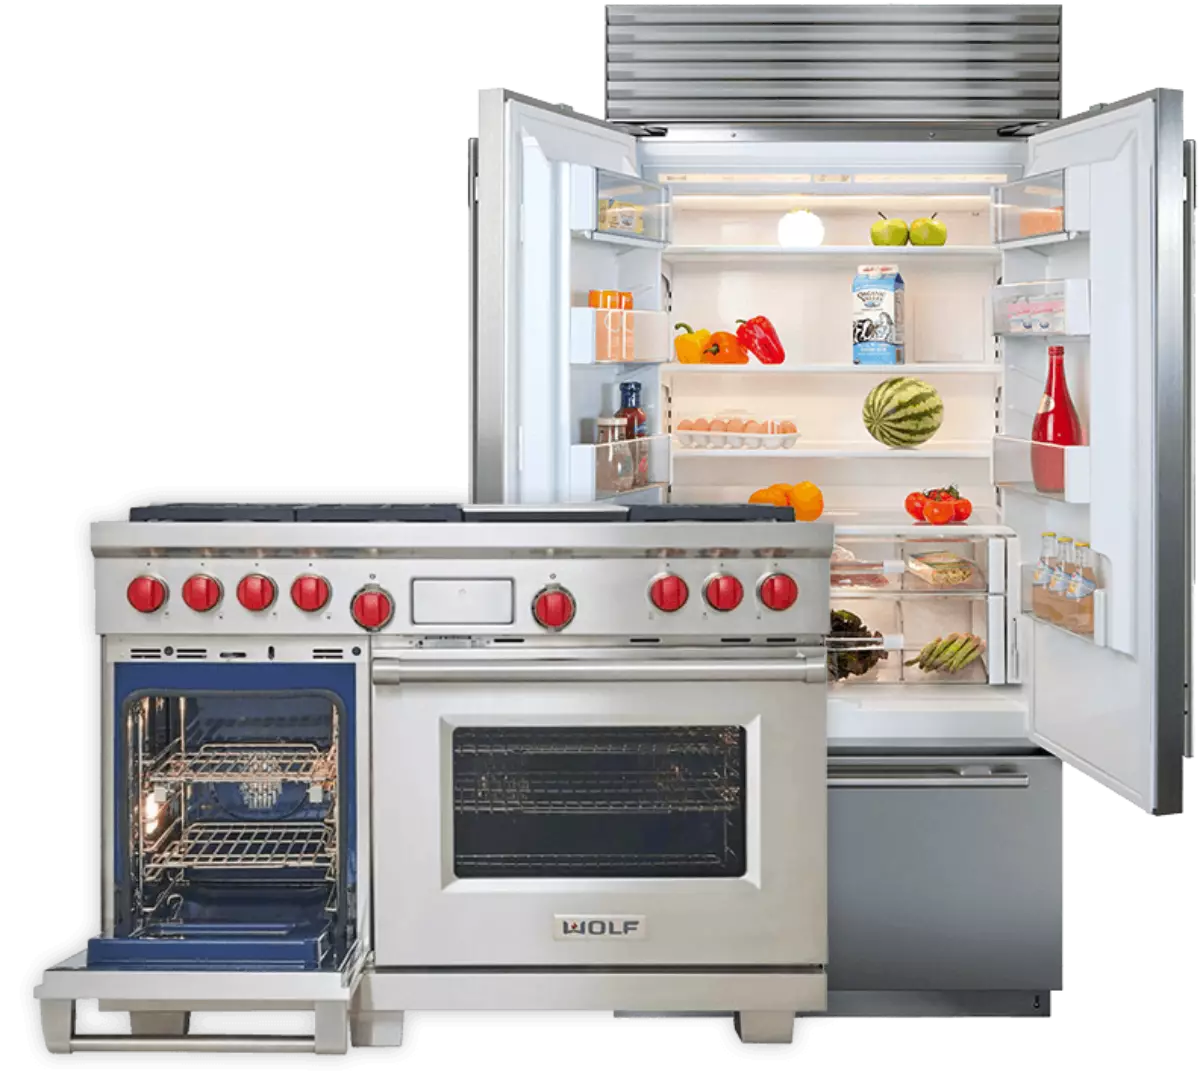 Sub-Zero and Wolf Appliance Repair Service - Wolf Oven Repair